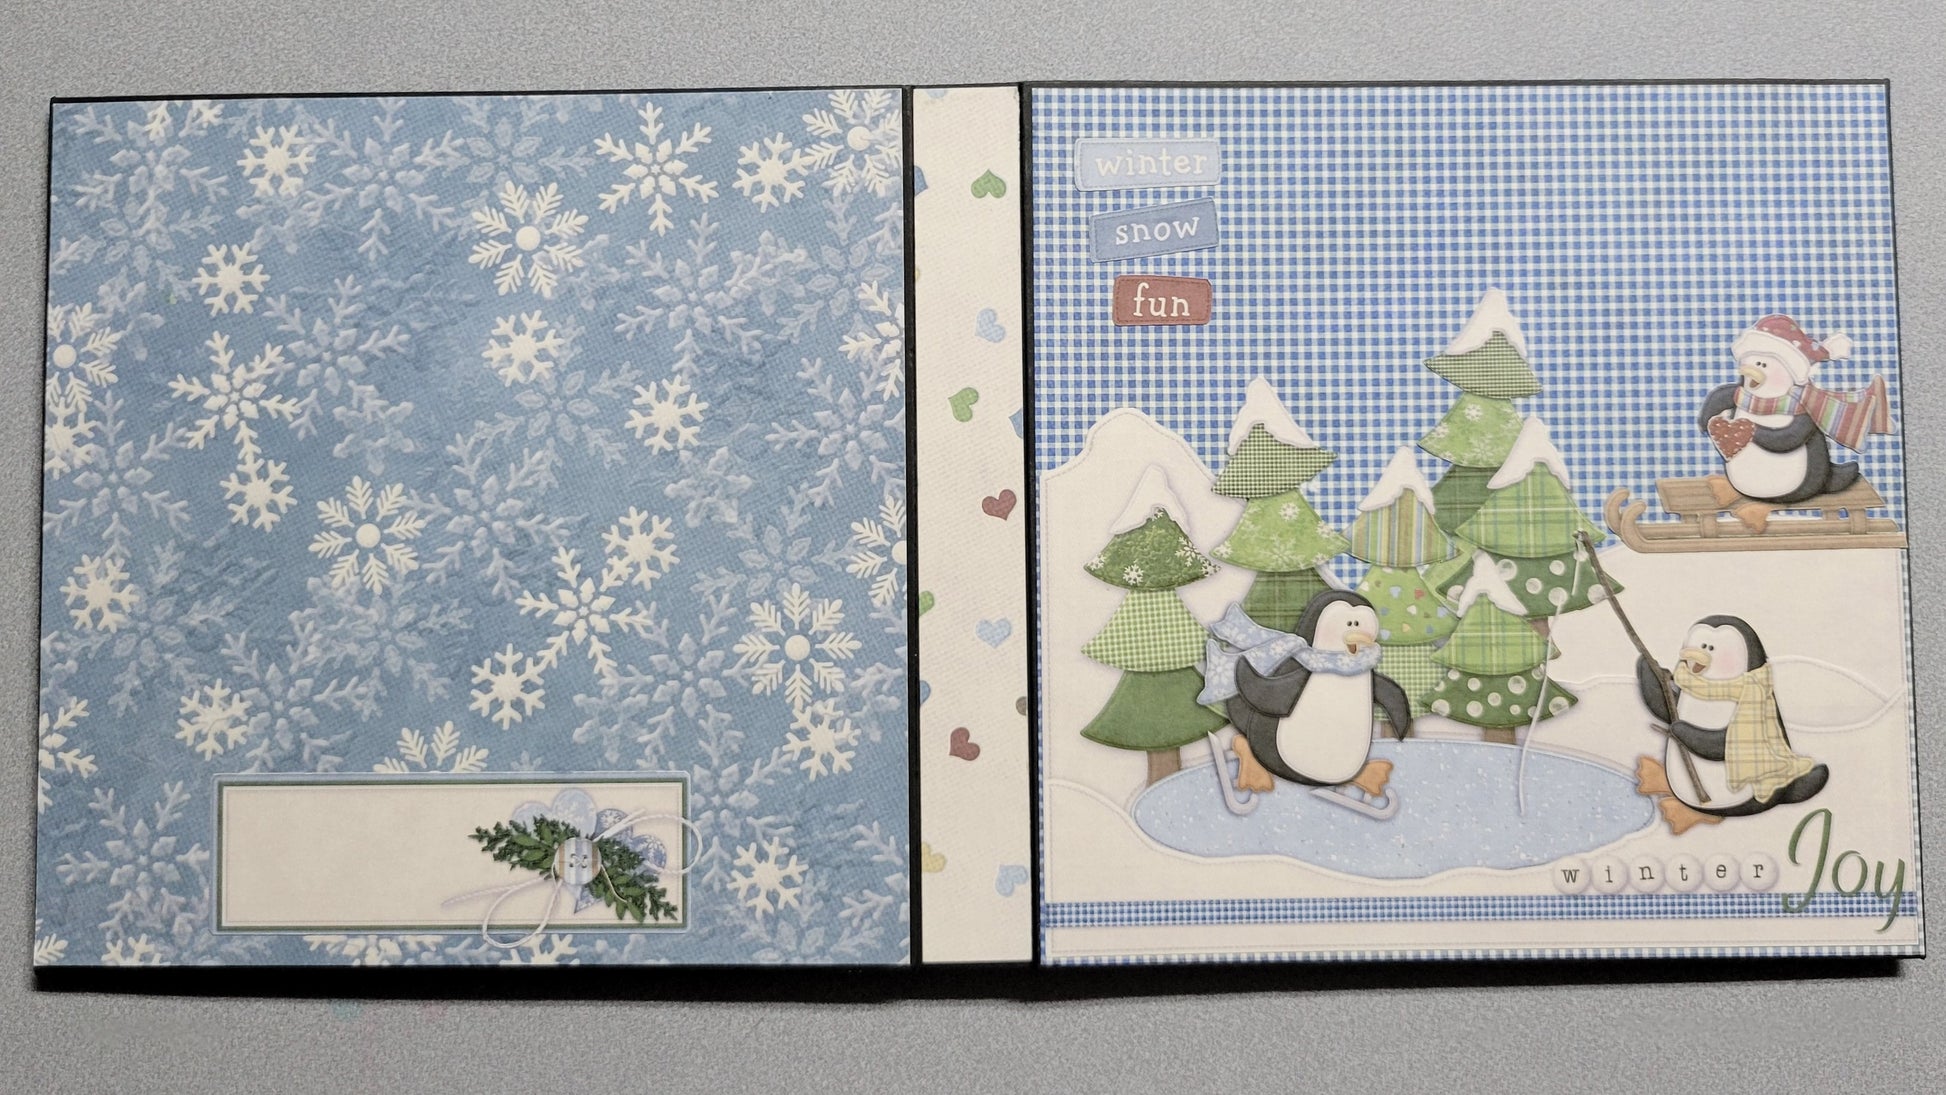 Winter Fun Photo Album front and back cover.